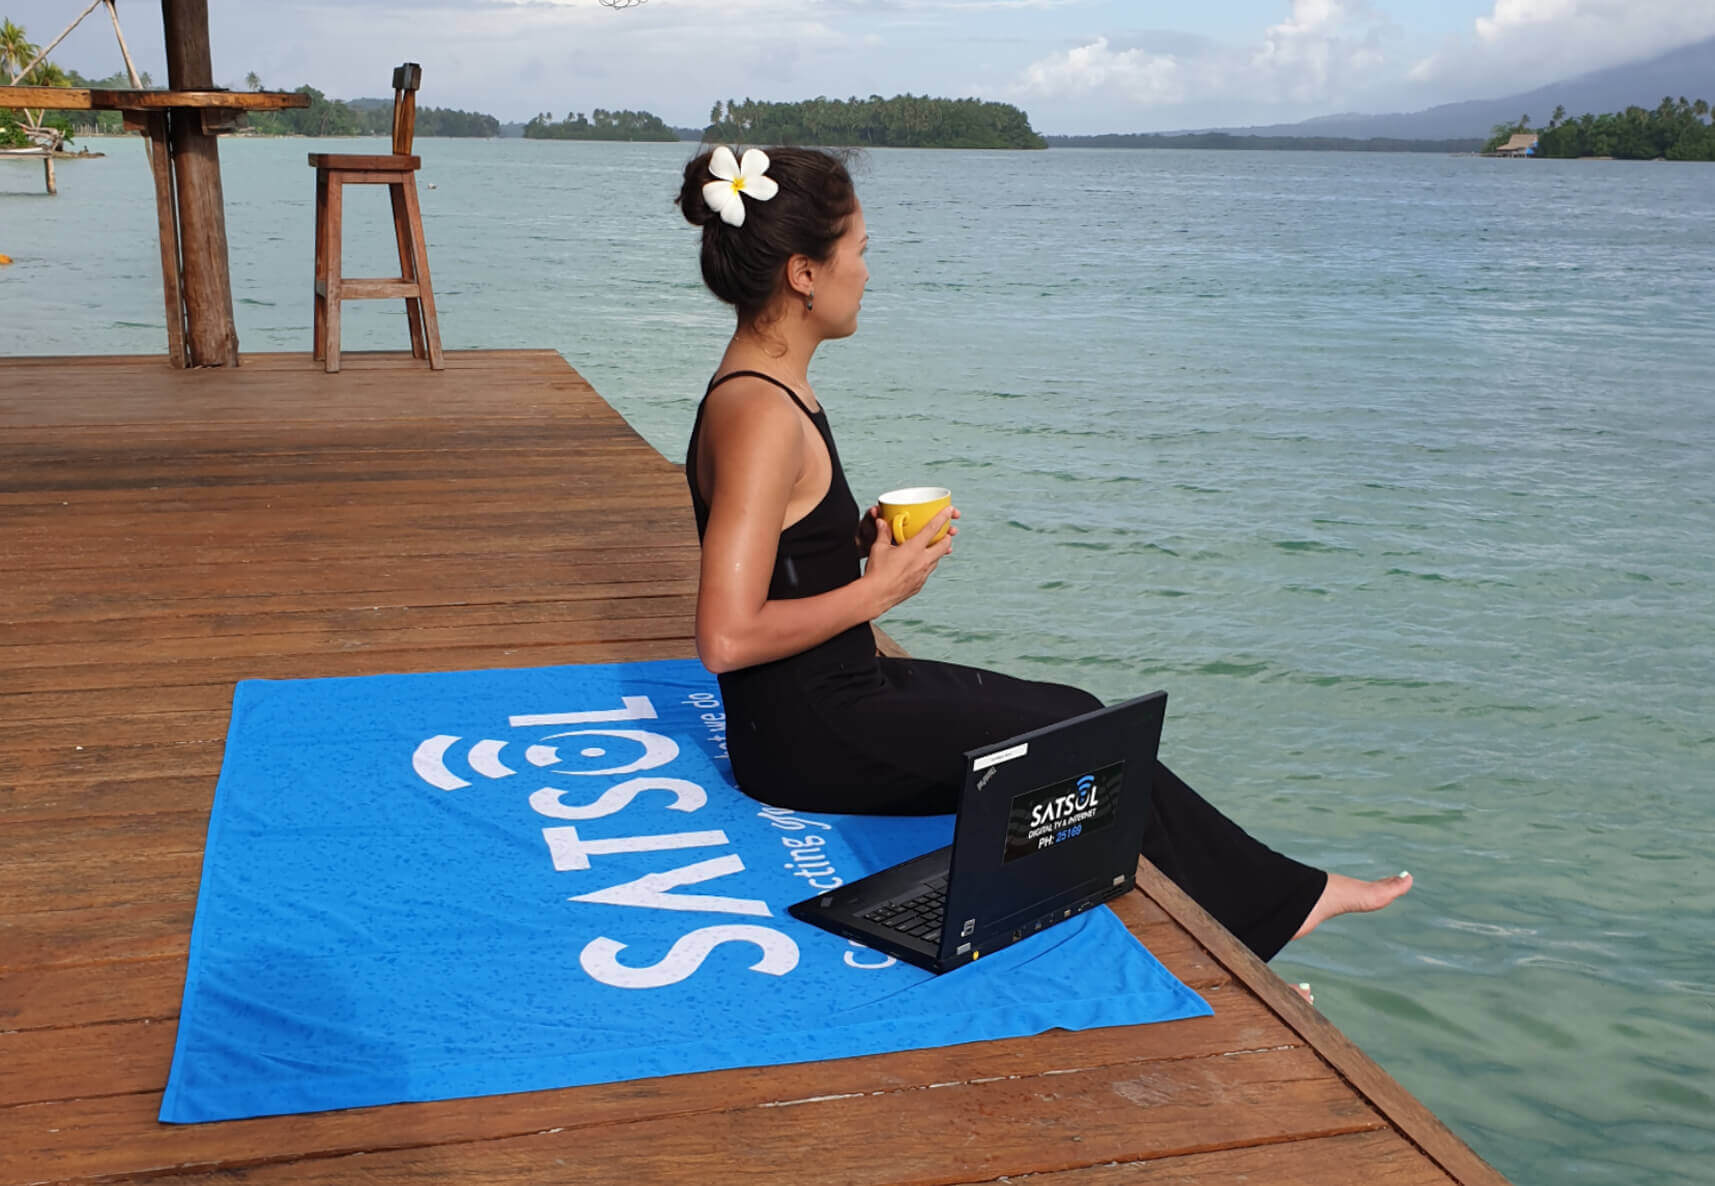 A woman sitting near a lake is connected to WI-FI with SATSOL hotspots